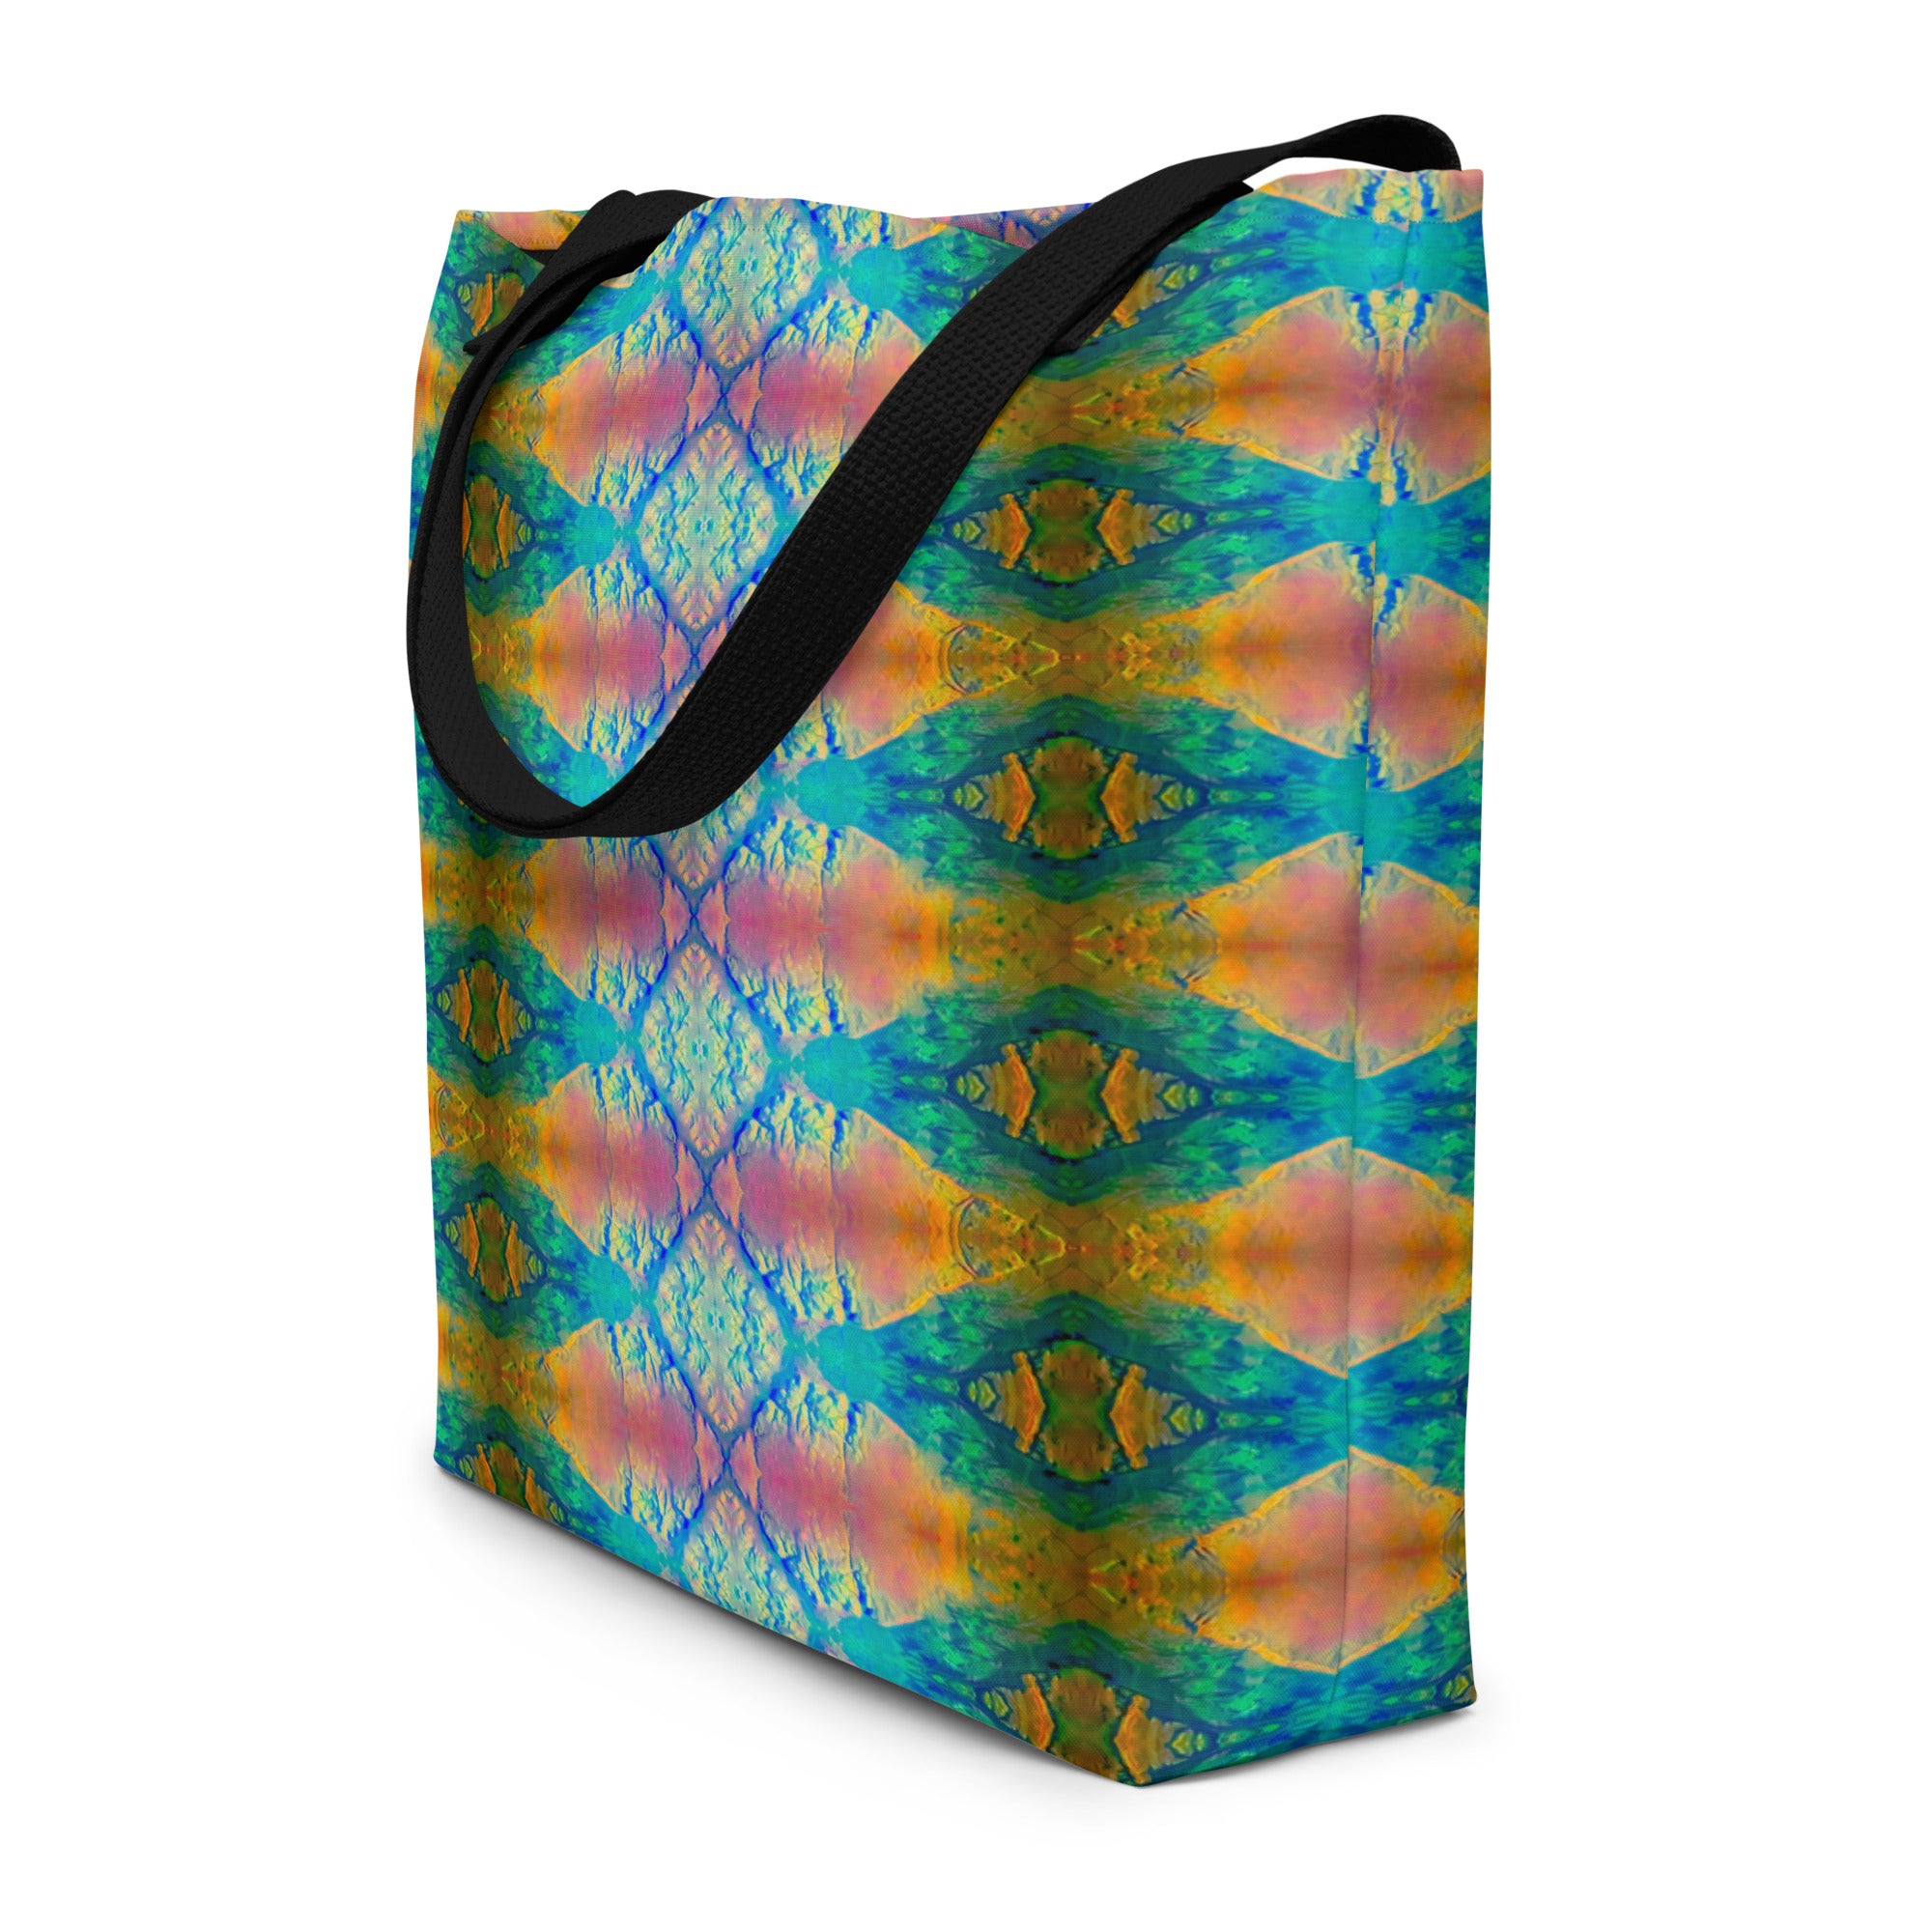 Gulf Shore Large Tote Bag With Pocket Triboca Arts   